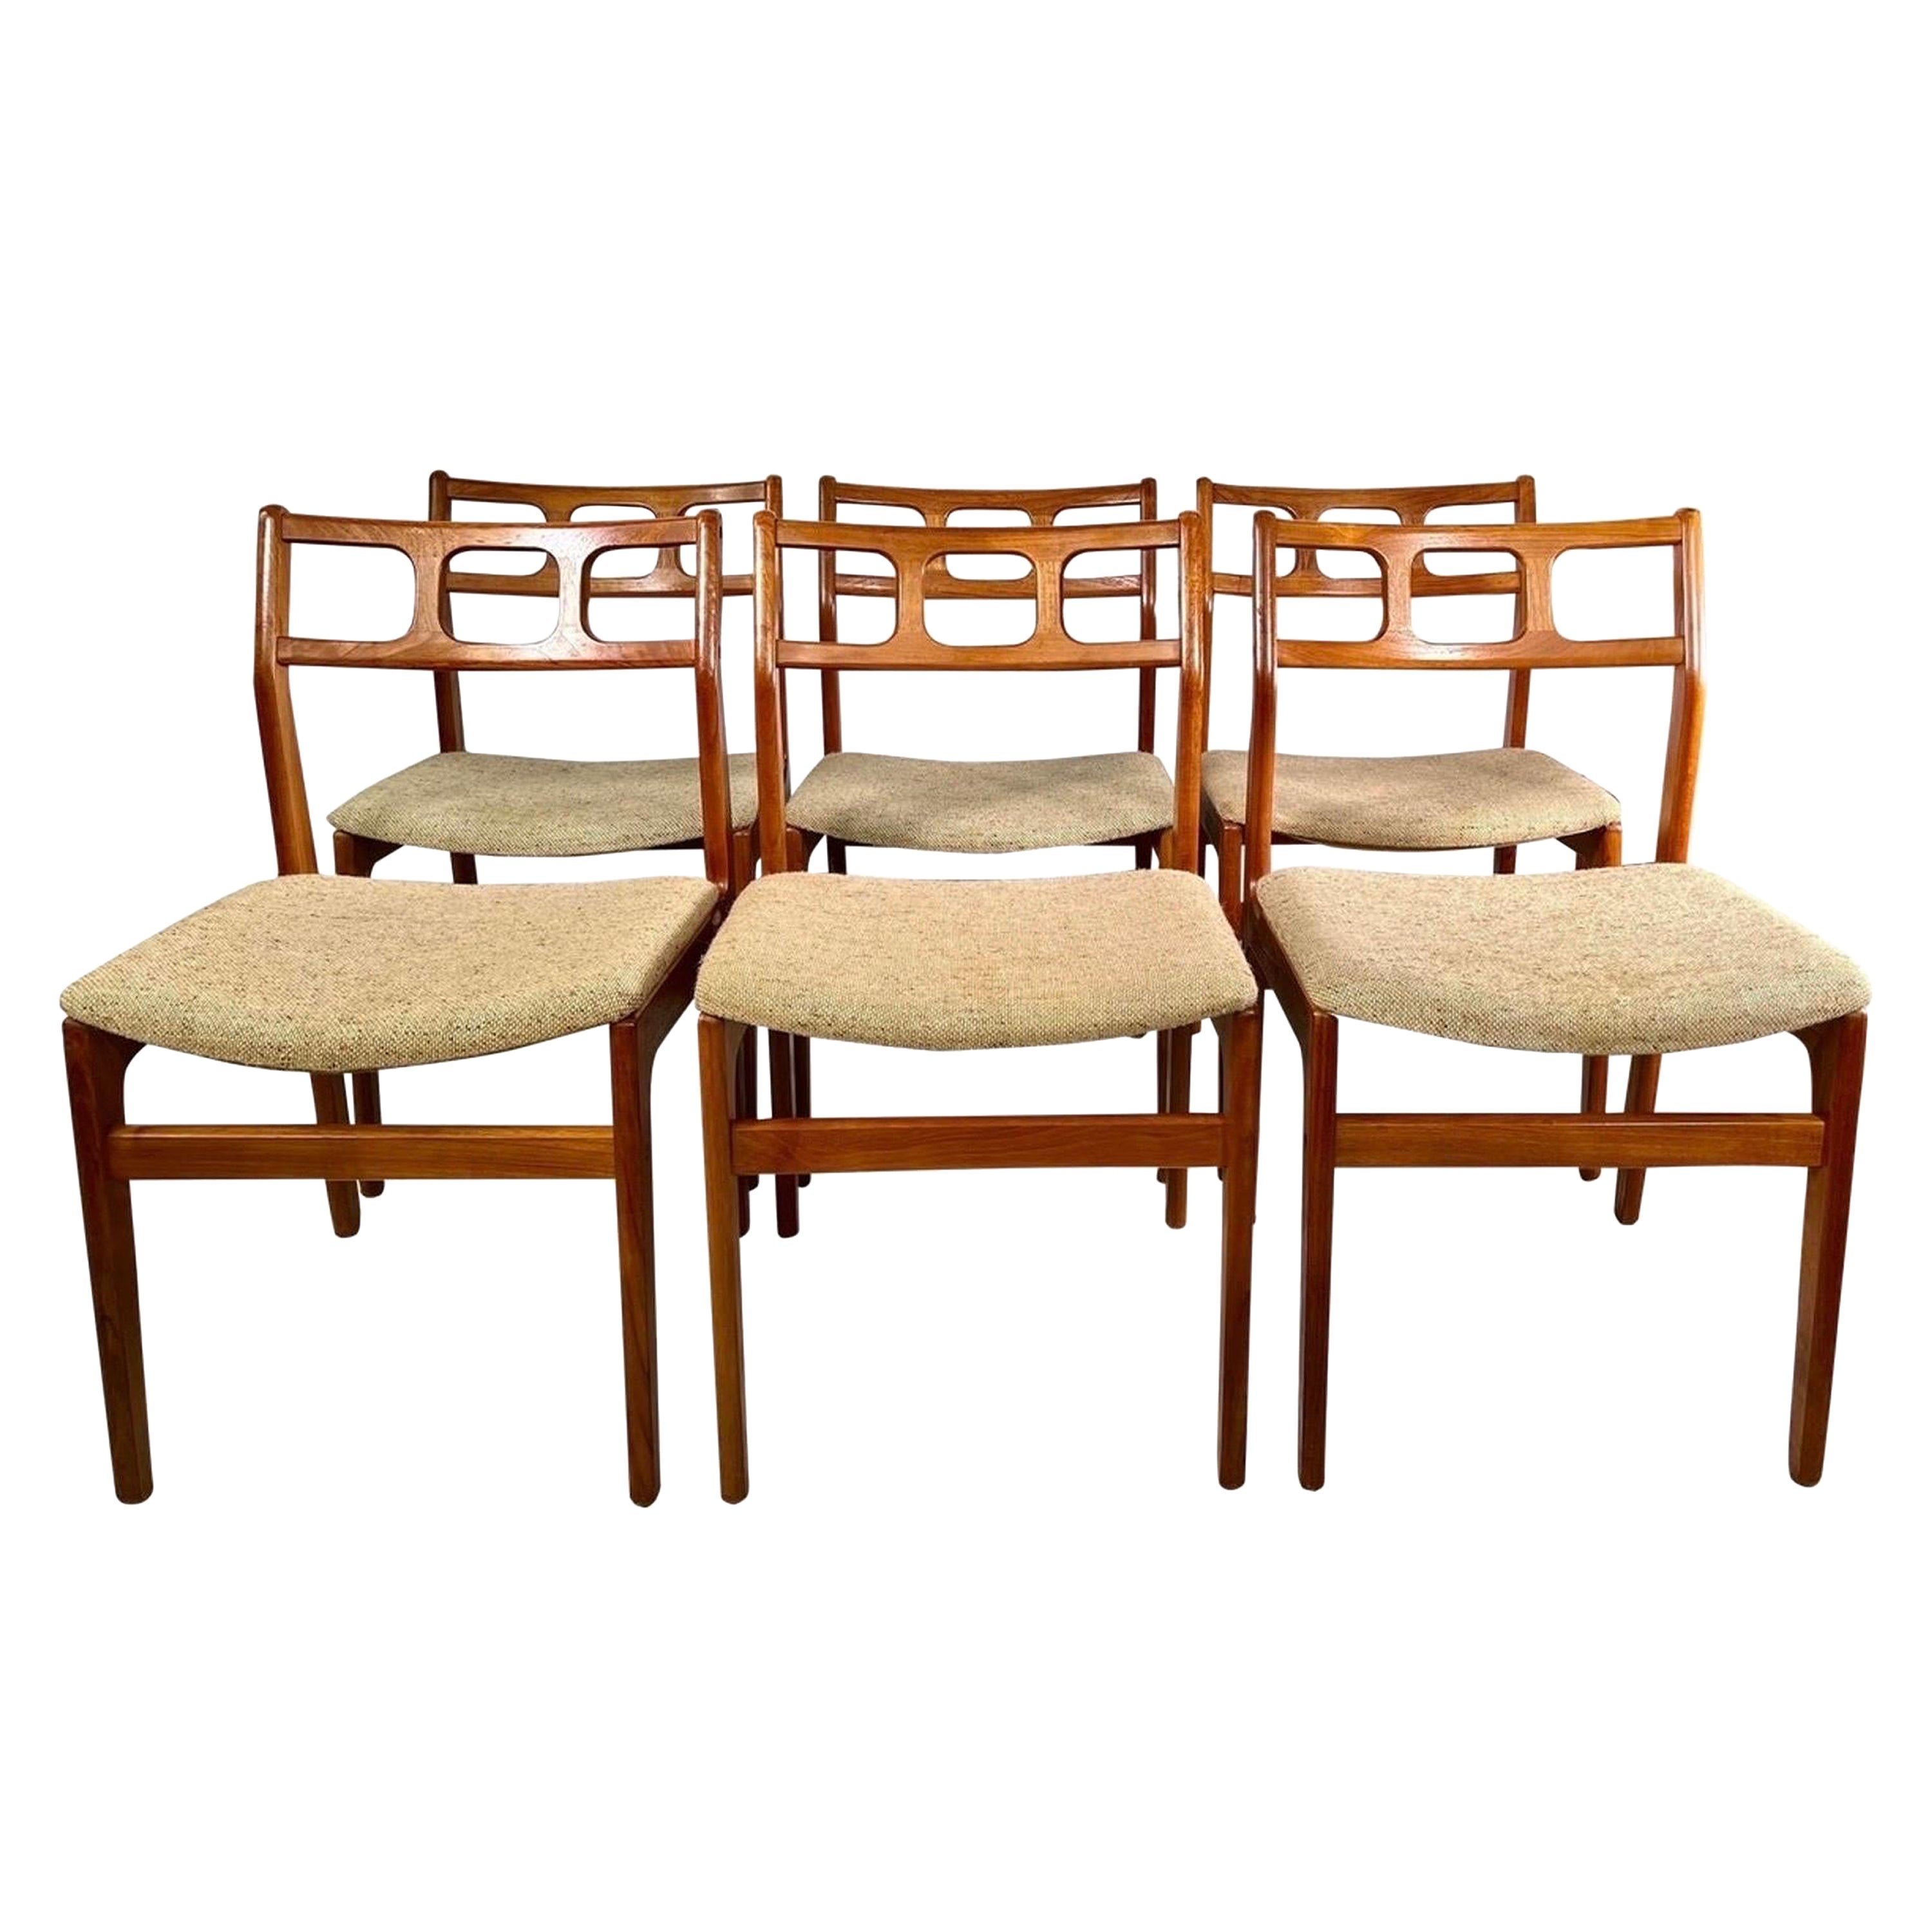 Danish Style D-Scan Sculptural Dining Chairs, Set of 6